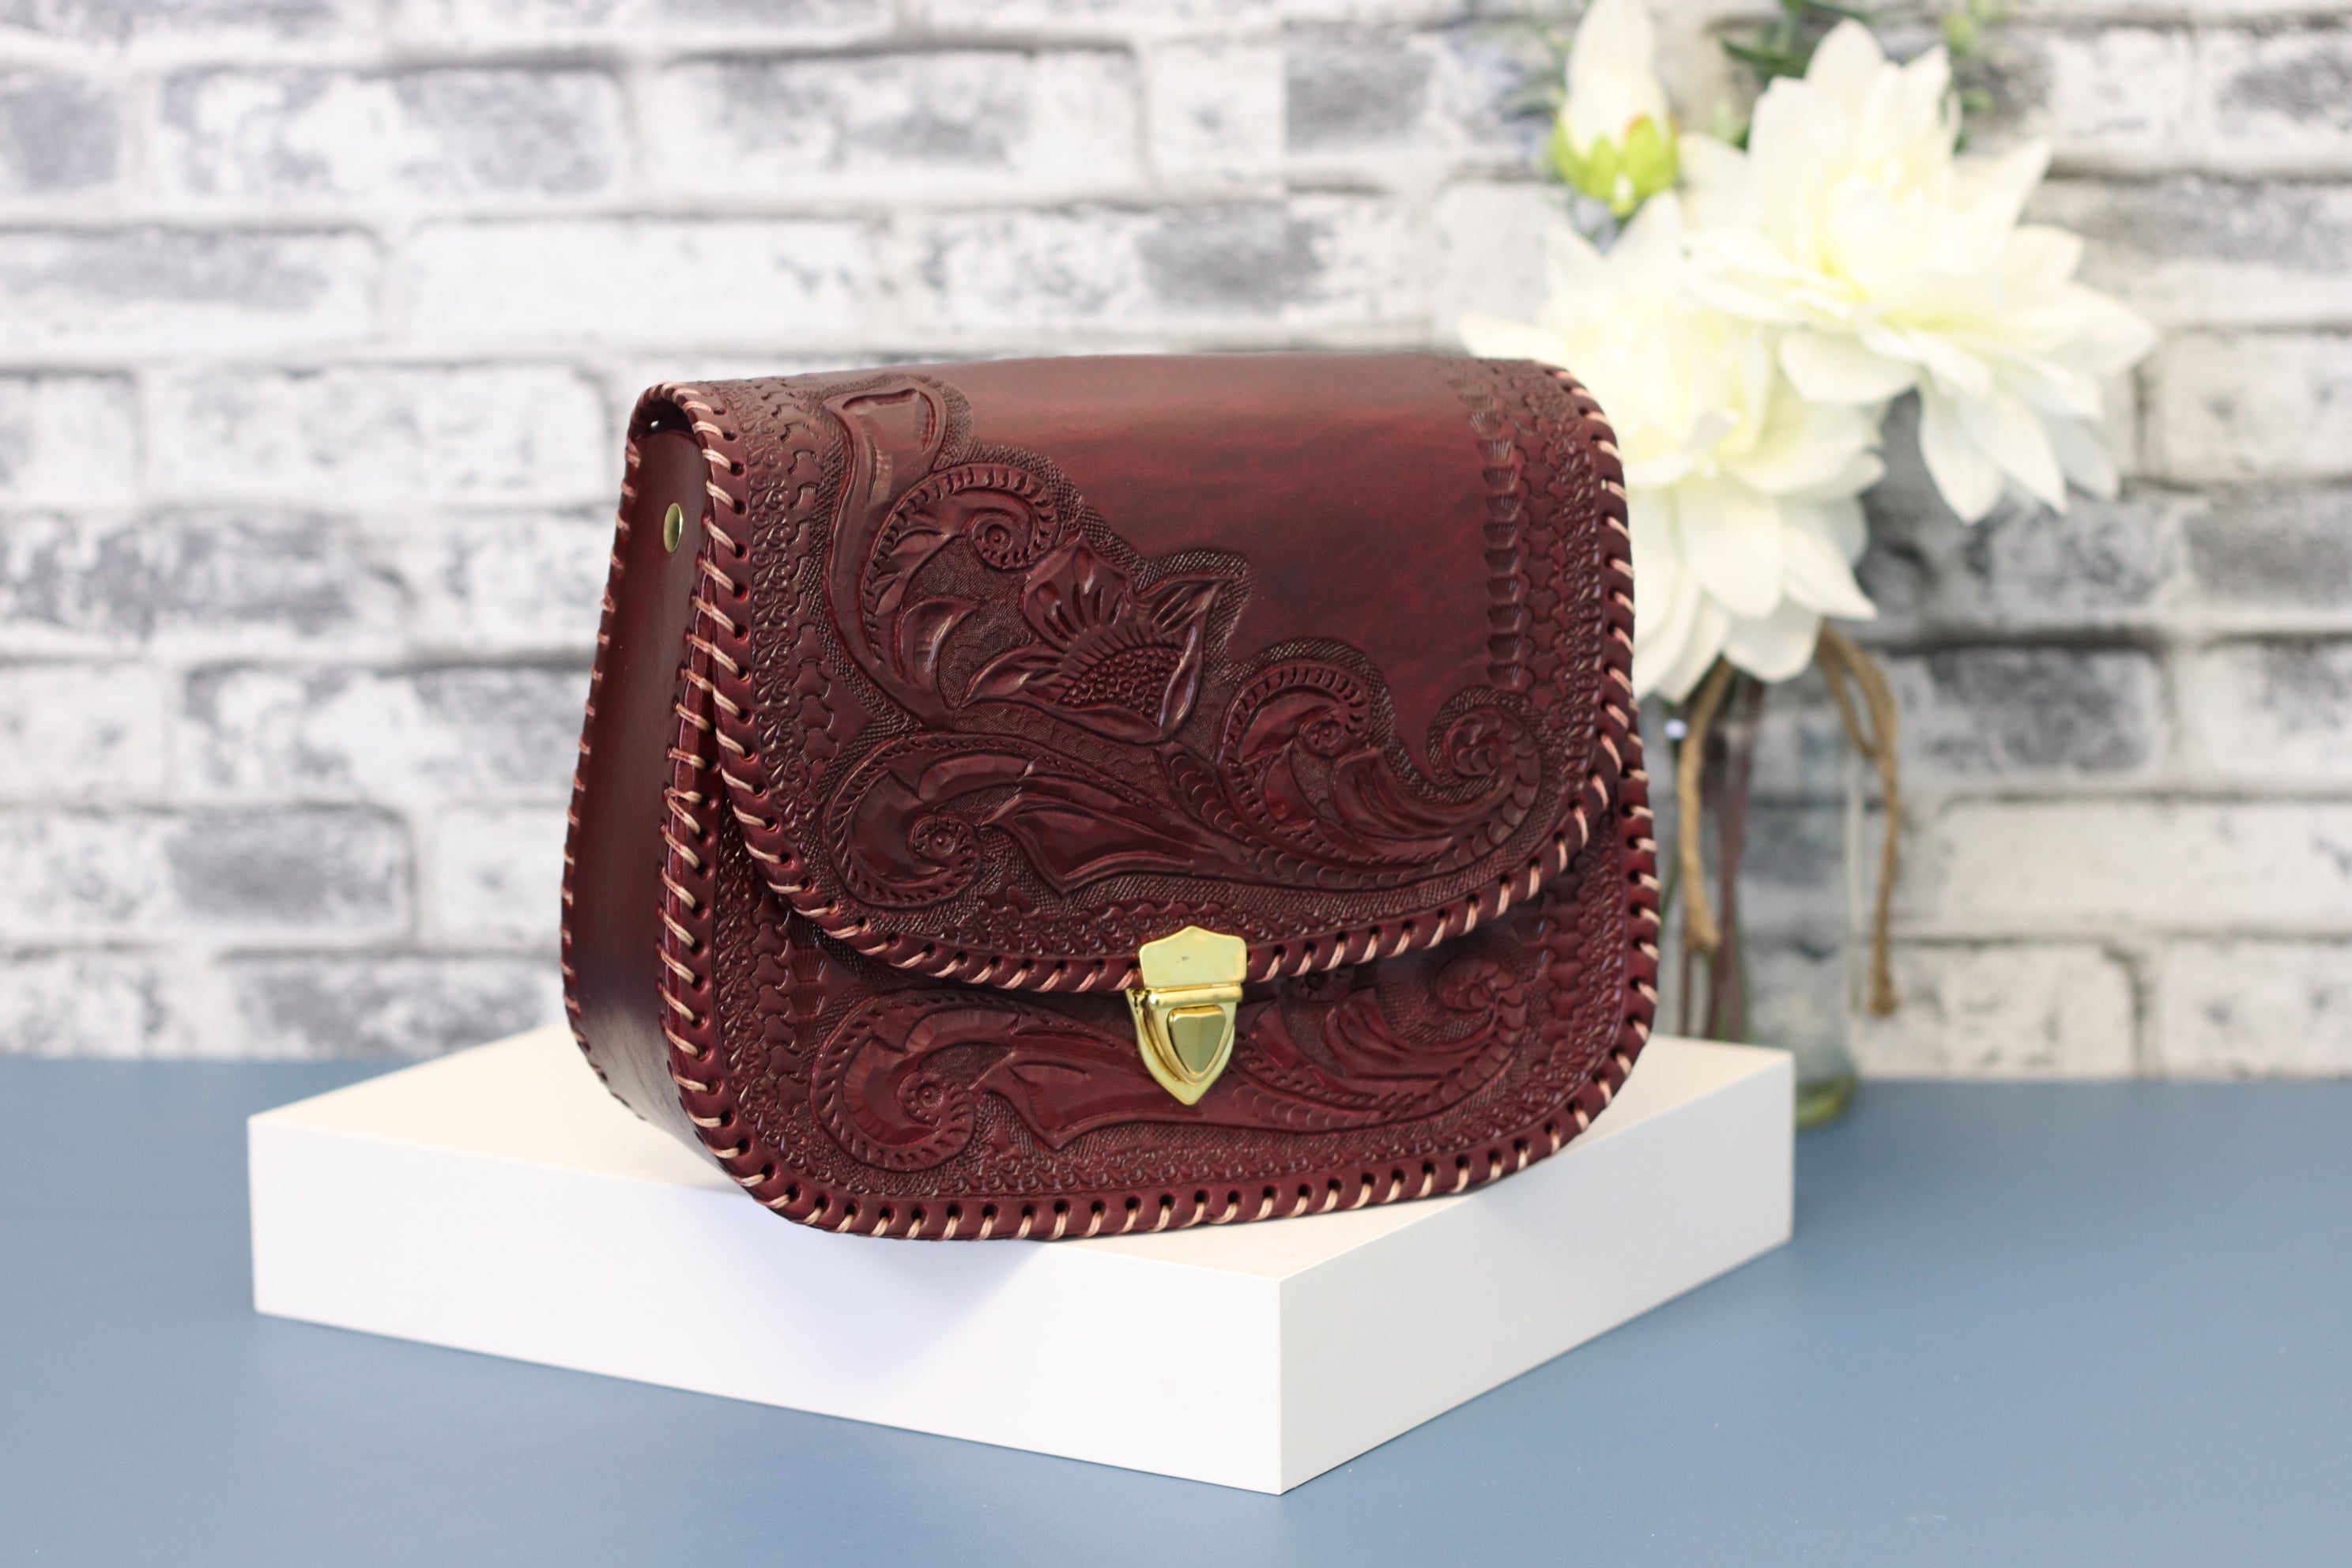 Wine color leather clutch,hand-tooled leather with gold clasp closure. Clutch Handbag. Made by artisans in Central Mexico, shipping from the USA. Handmade. Buy now at www.felipeandgrace.com. 